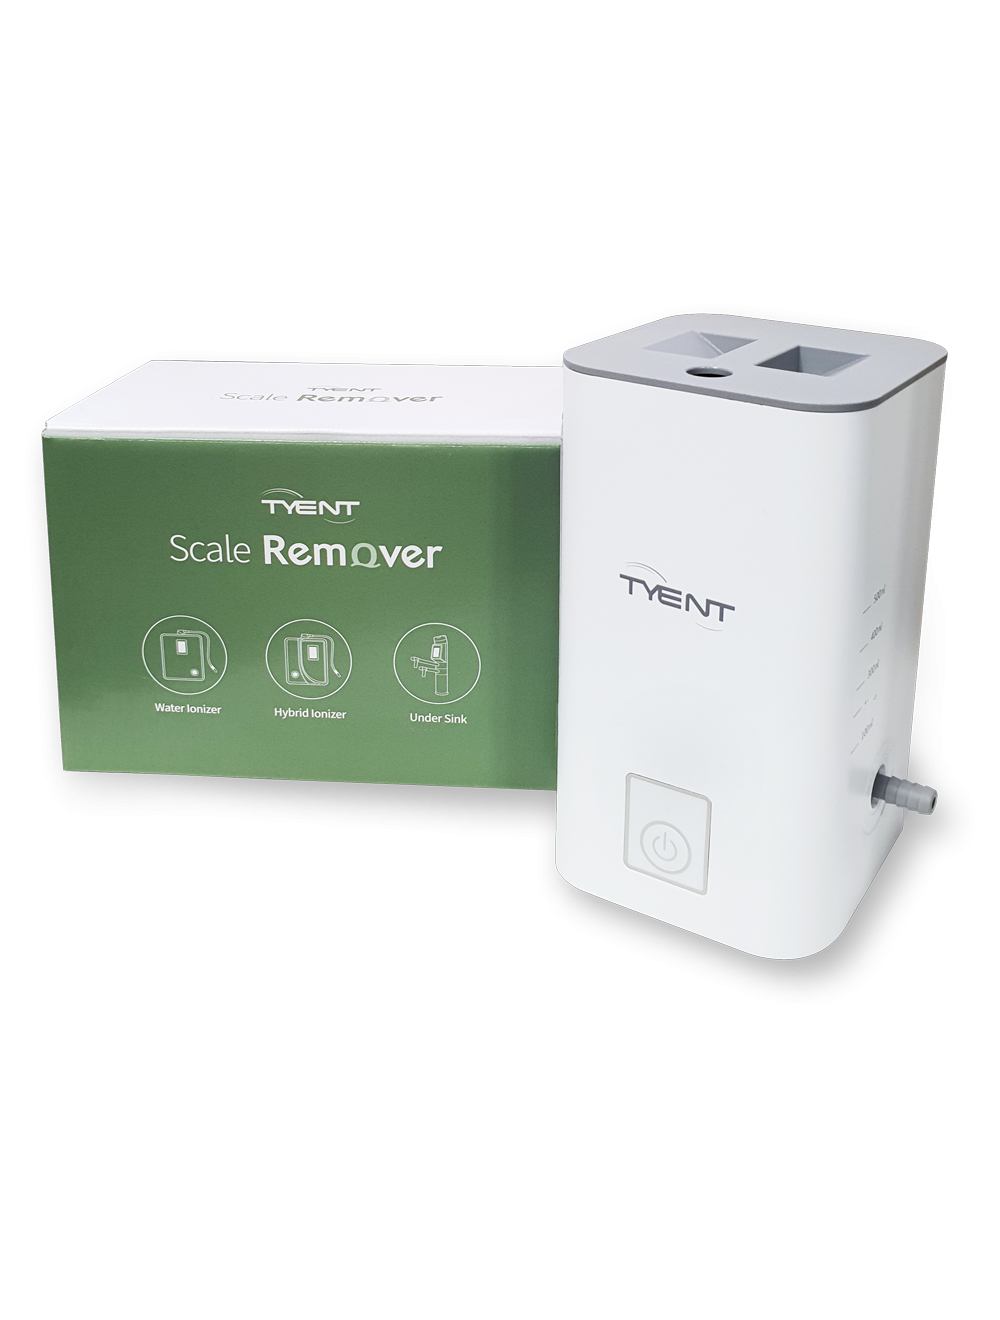 Tyent Scale Remover